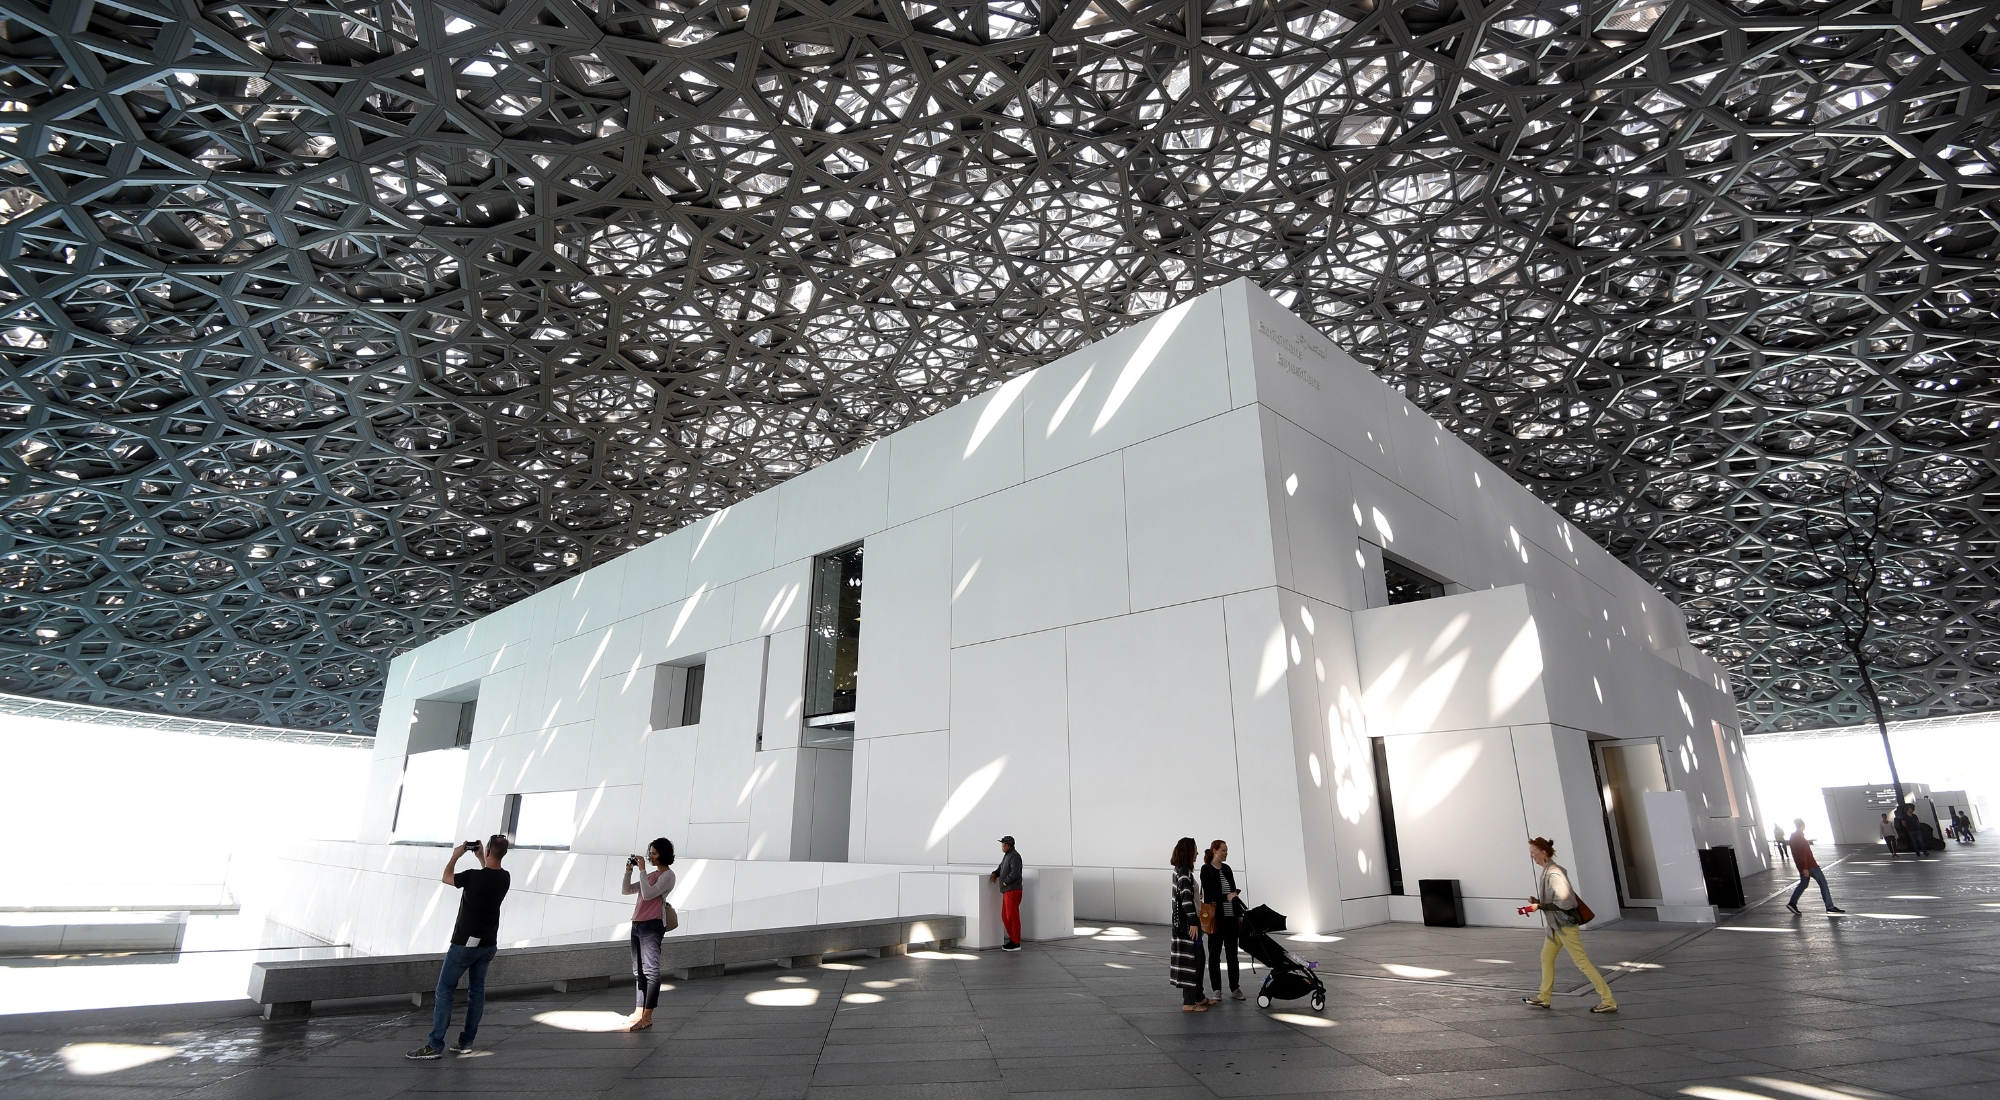 A general view of the Louvre Abu Dhabi museum on January 9, 2018 in Abu Dhabi, United Arab Emirates. (Photo by Tom Dulat/Getty Images)